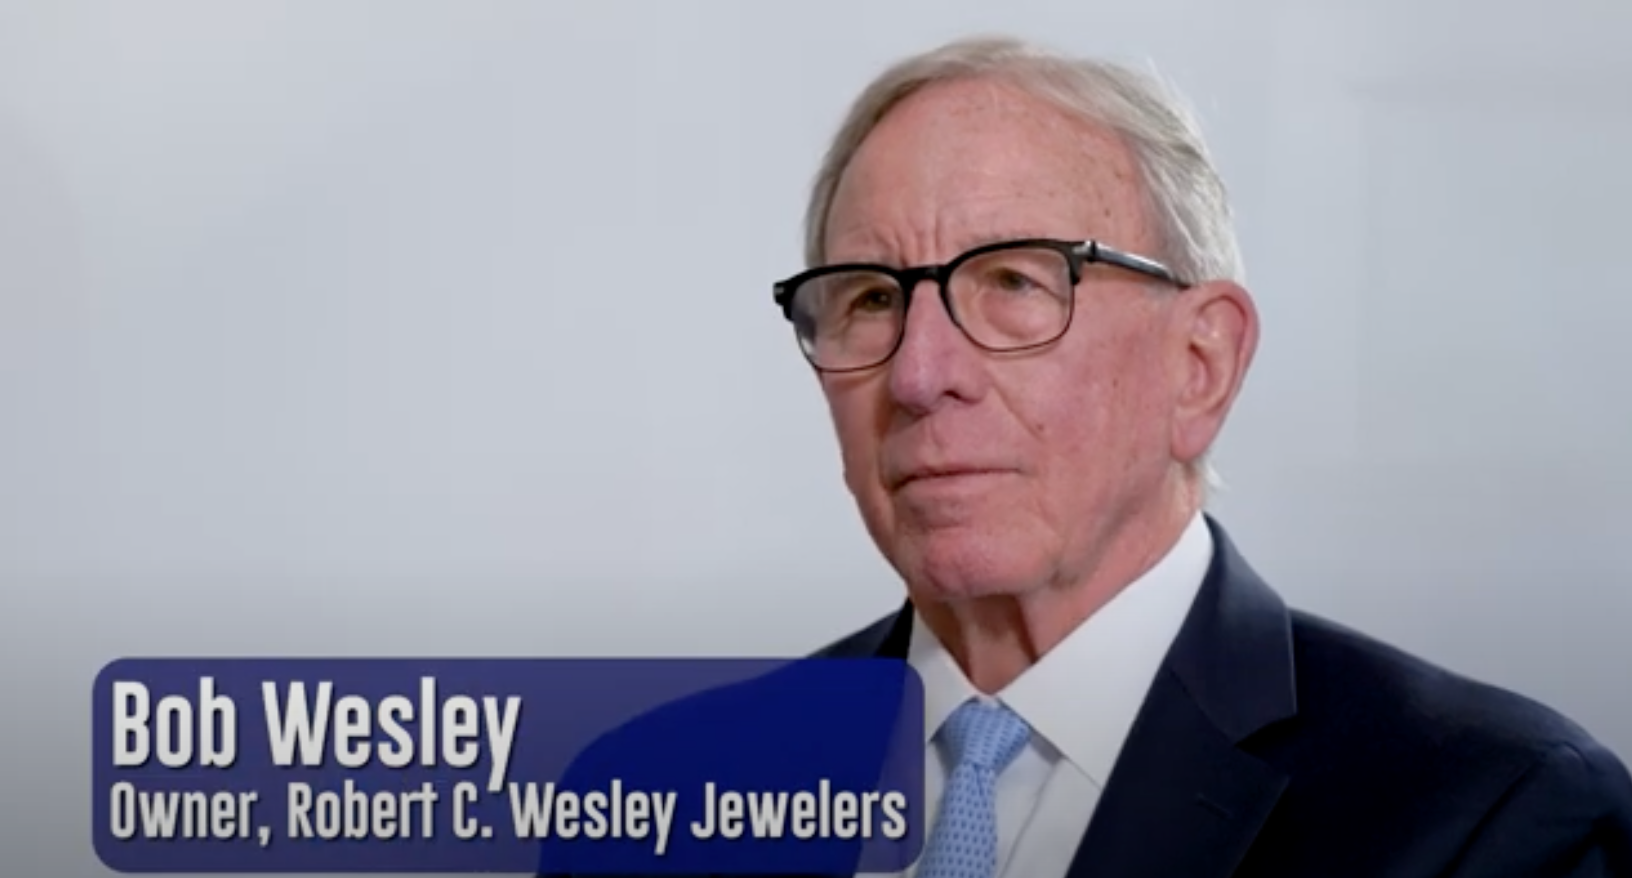 Photo from jewelry sale at Robert C. Wesley Jewelers